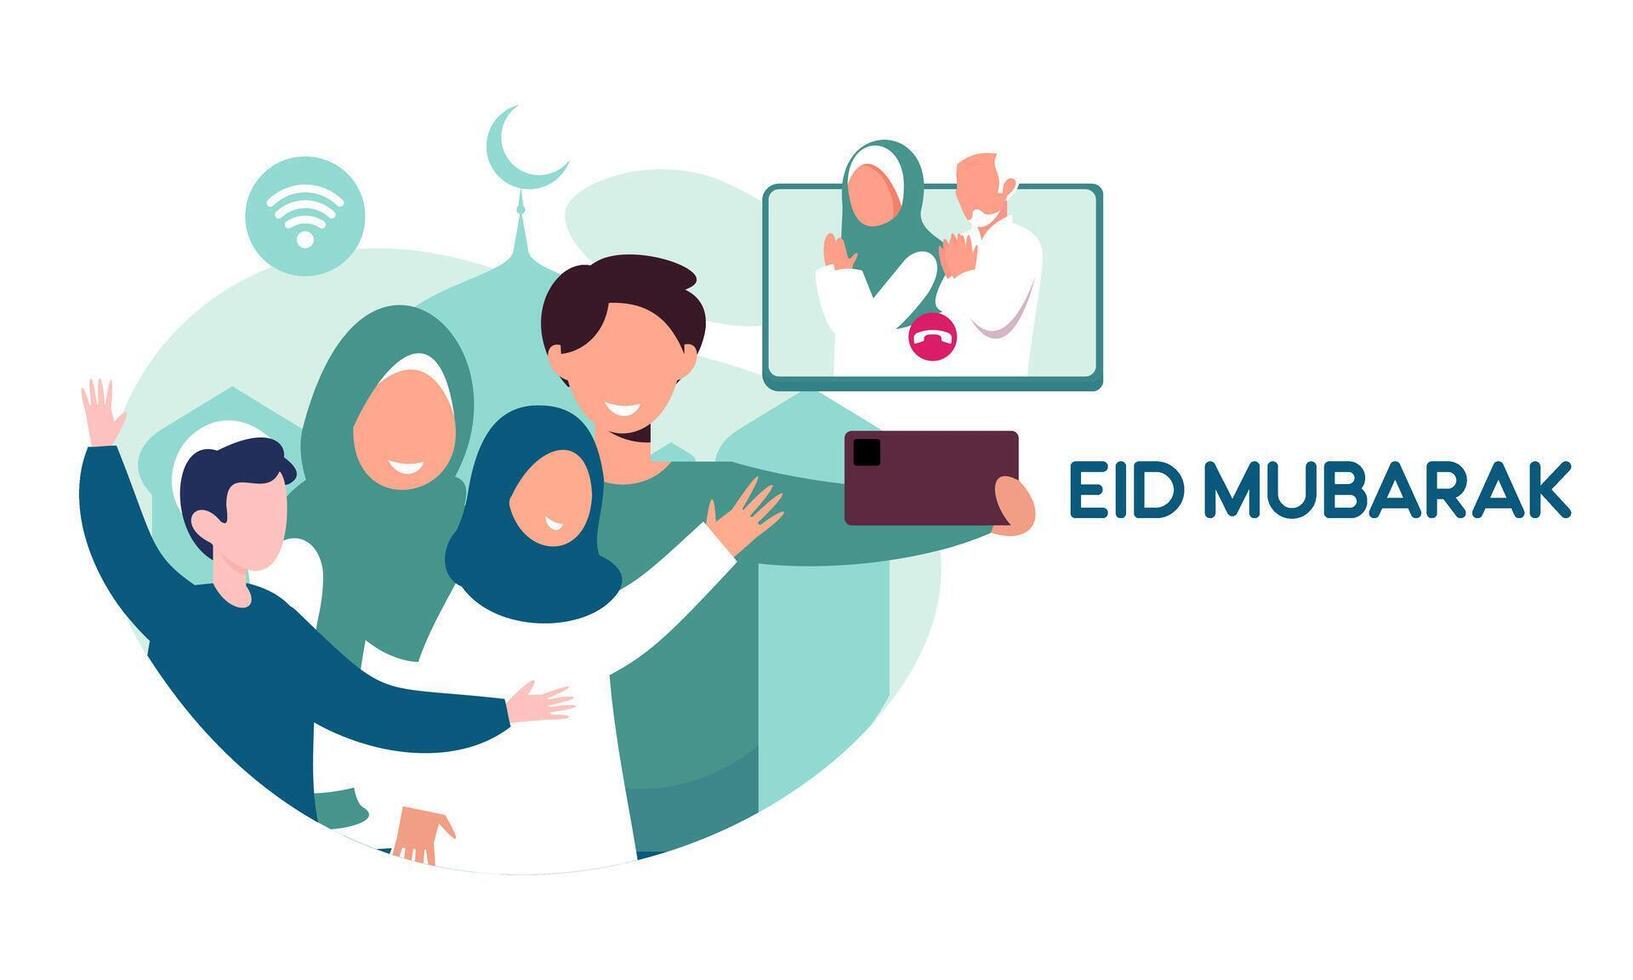 Muslim Family Contact Their Elder or Parents In Smartphone Video Call to Show Their Love in Eid Mubarak Celebration vector